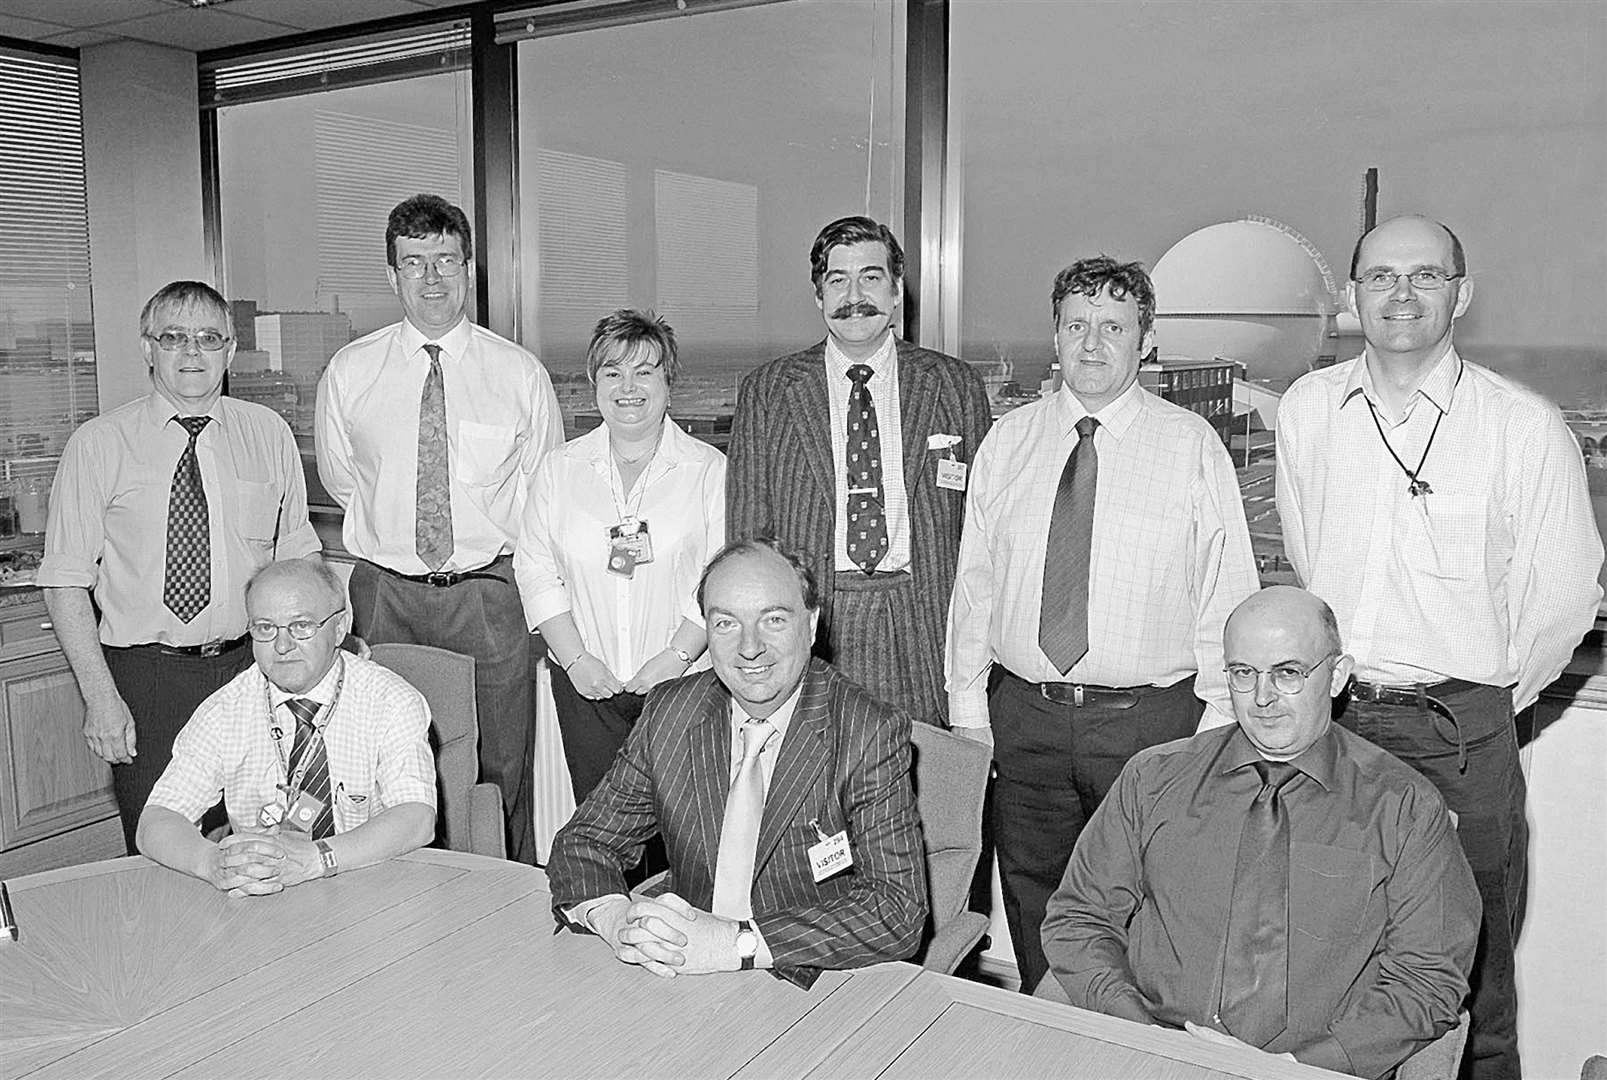 Norman Baker, Liberal Democrat shadow environment secretary, visited Dounreay this week in 2004 to hear how the site was being decommissioned. He and local MP John Thurso are pictured with trade union representatives.